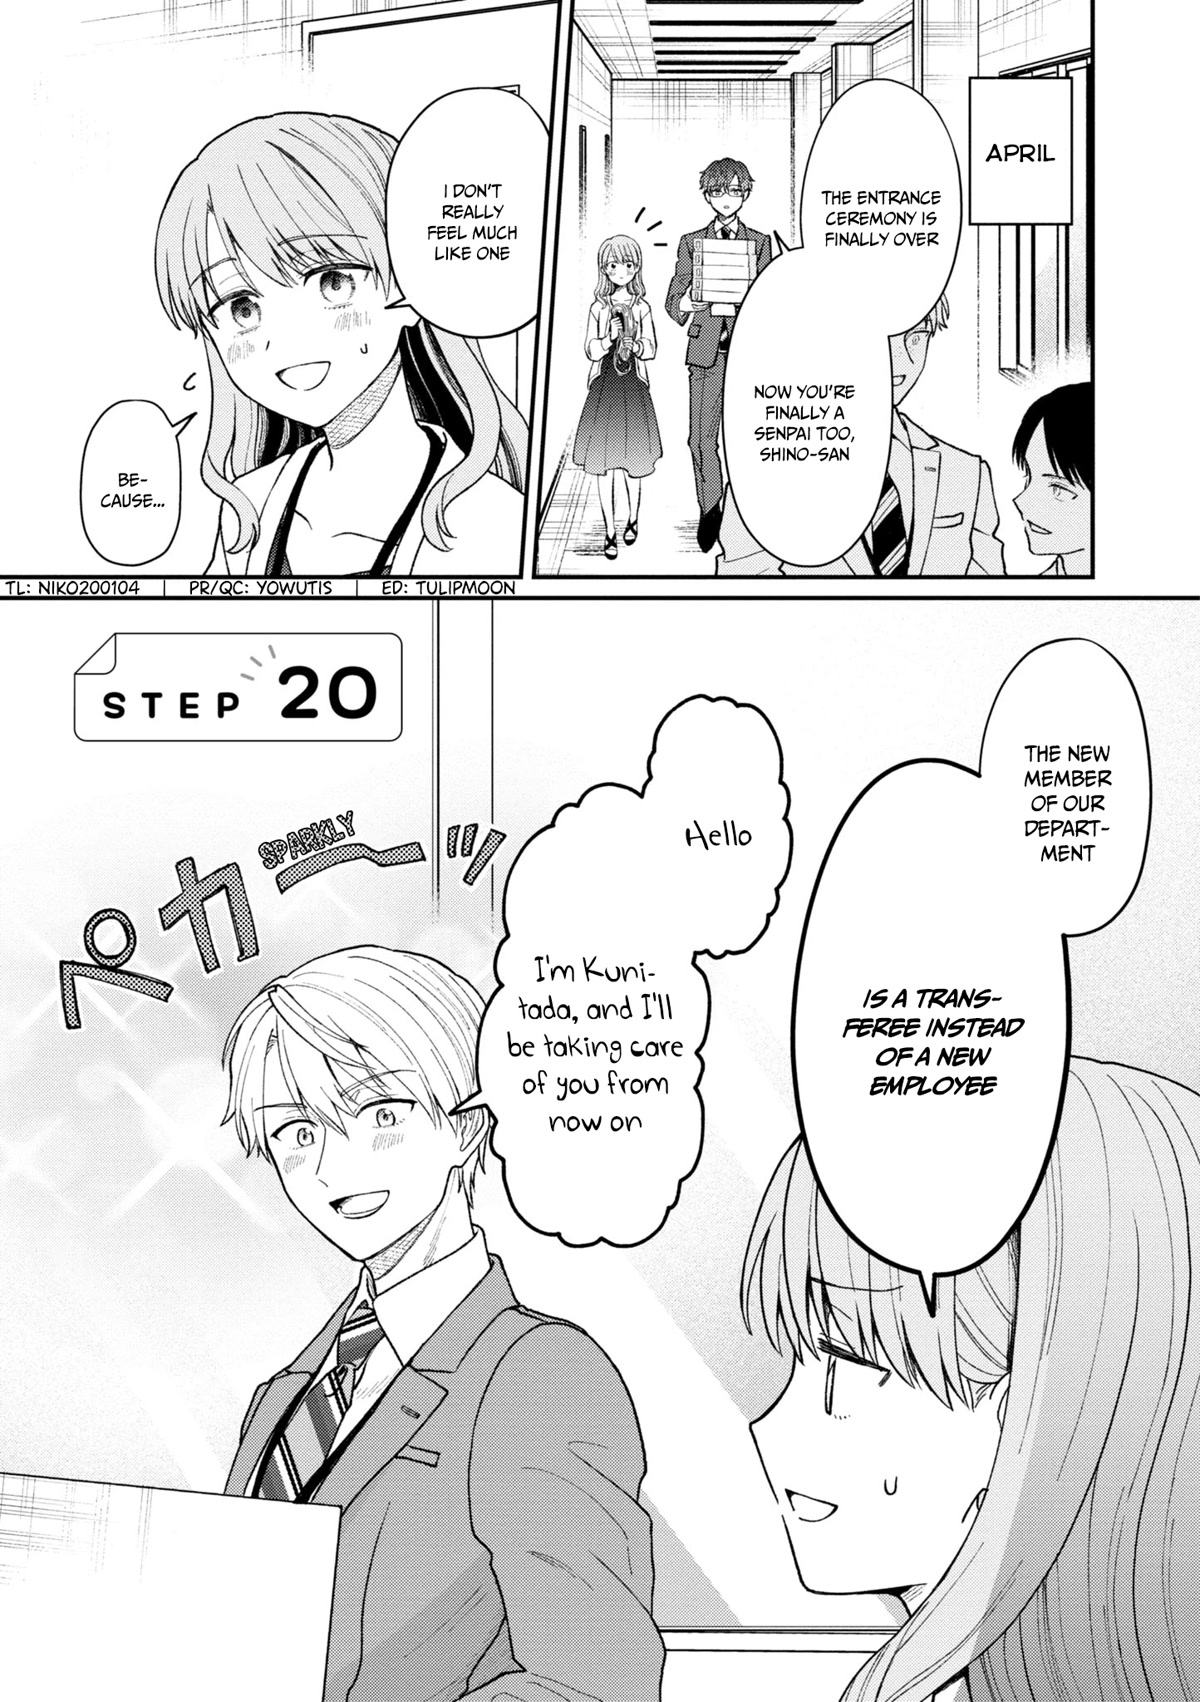 The New-Hire Who Could "Read" Emotions and the Unsociable Senpai - chapter 20 - #2